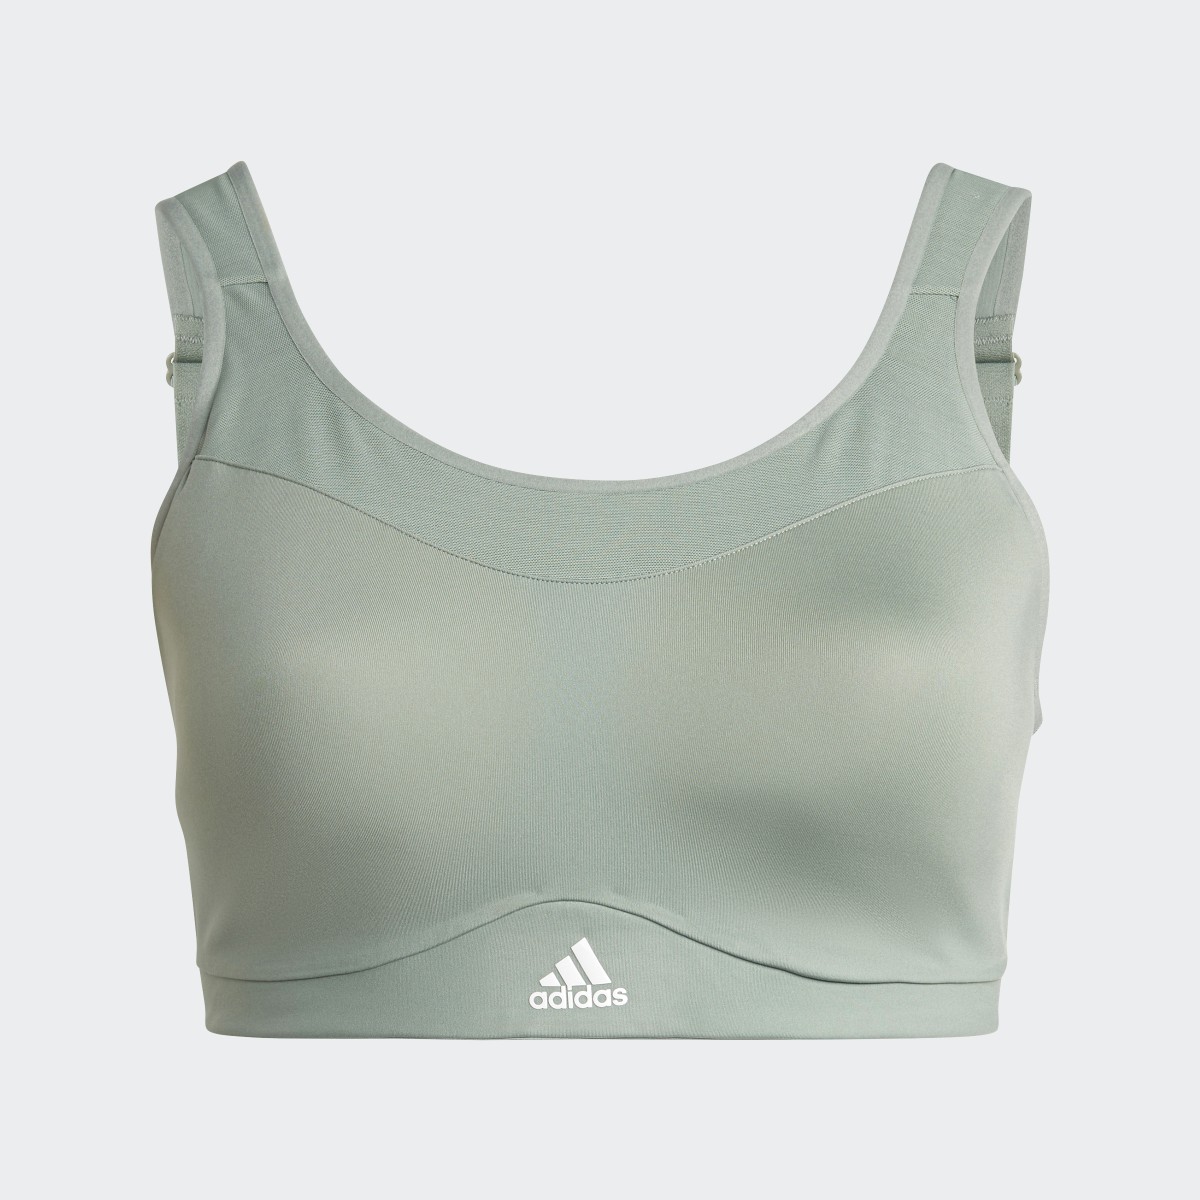 Adidas TLRD Impact Training High-Support Bra (Plus Size). 5